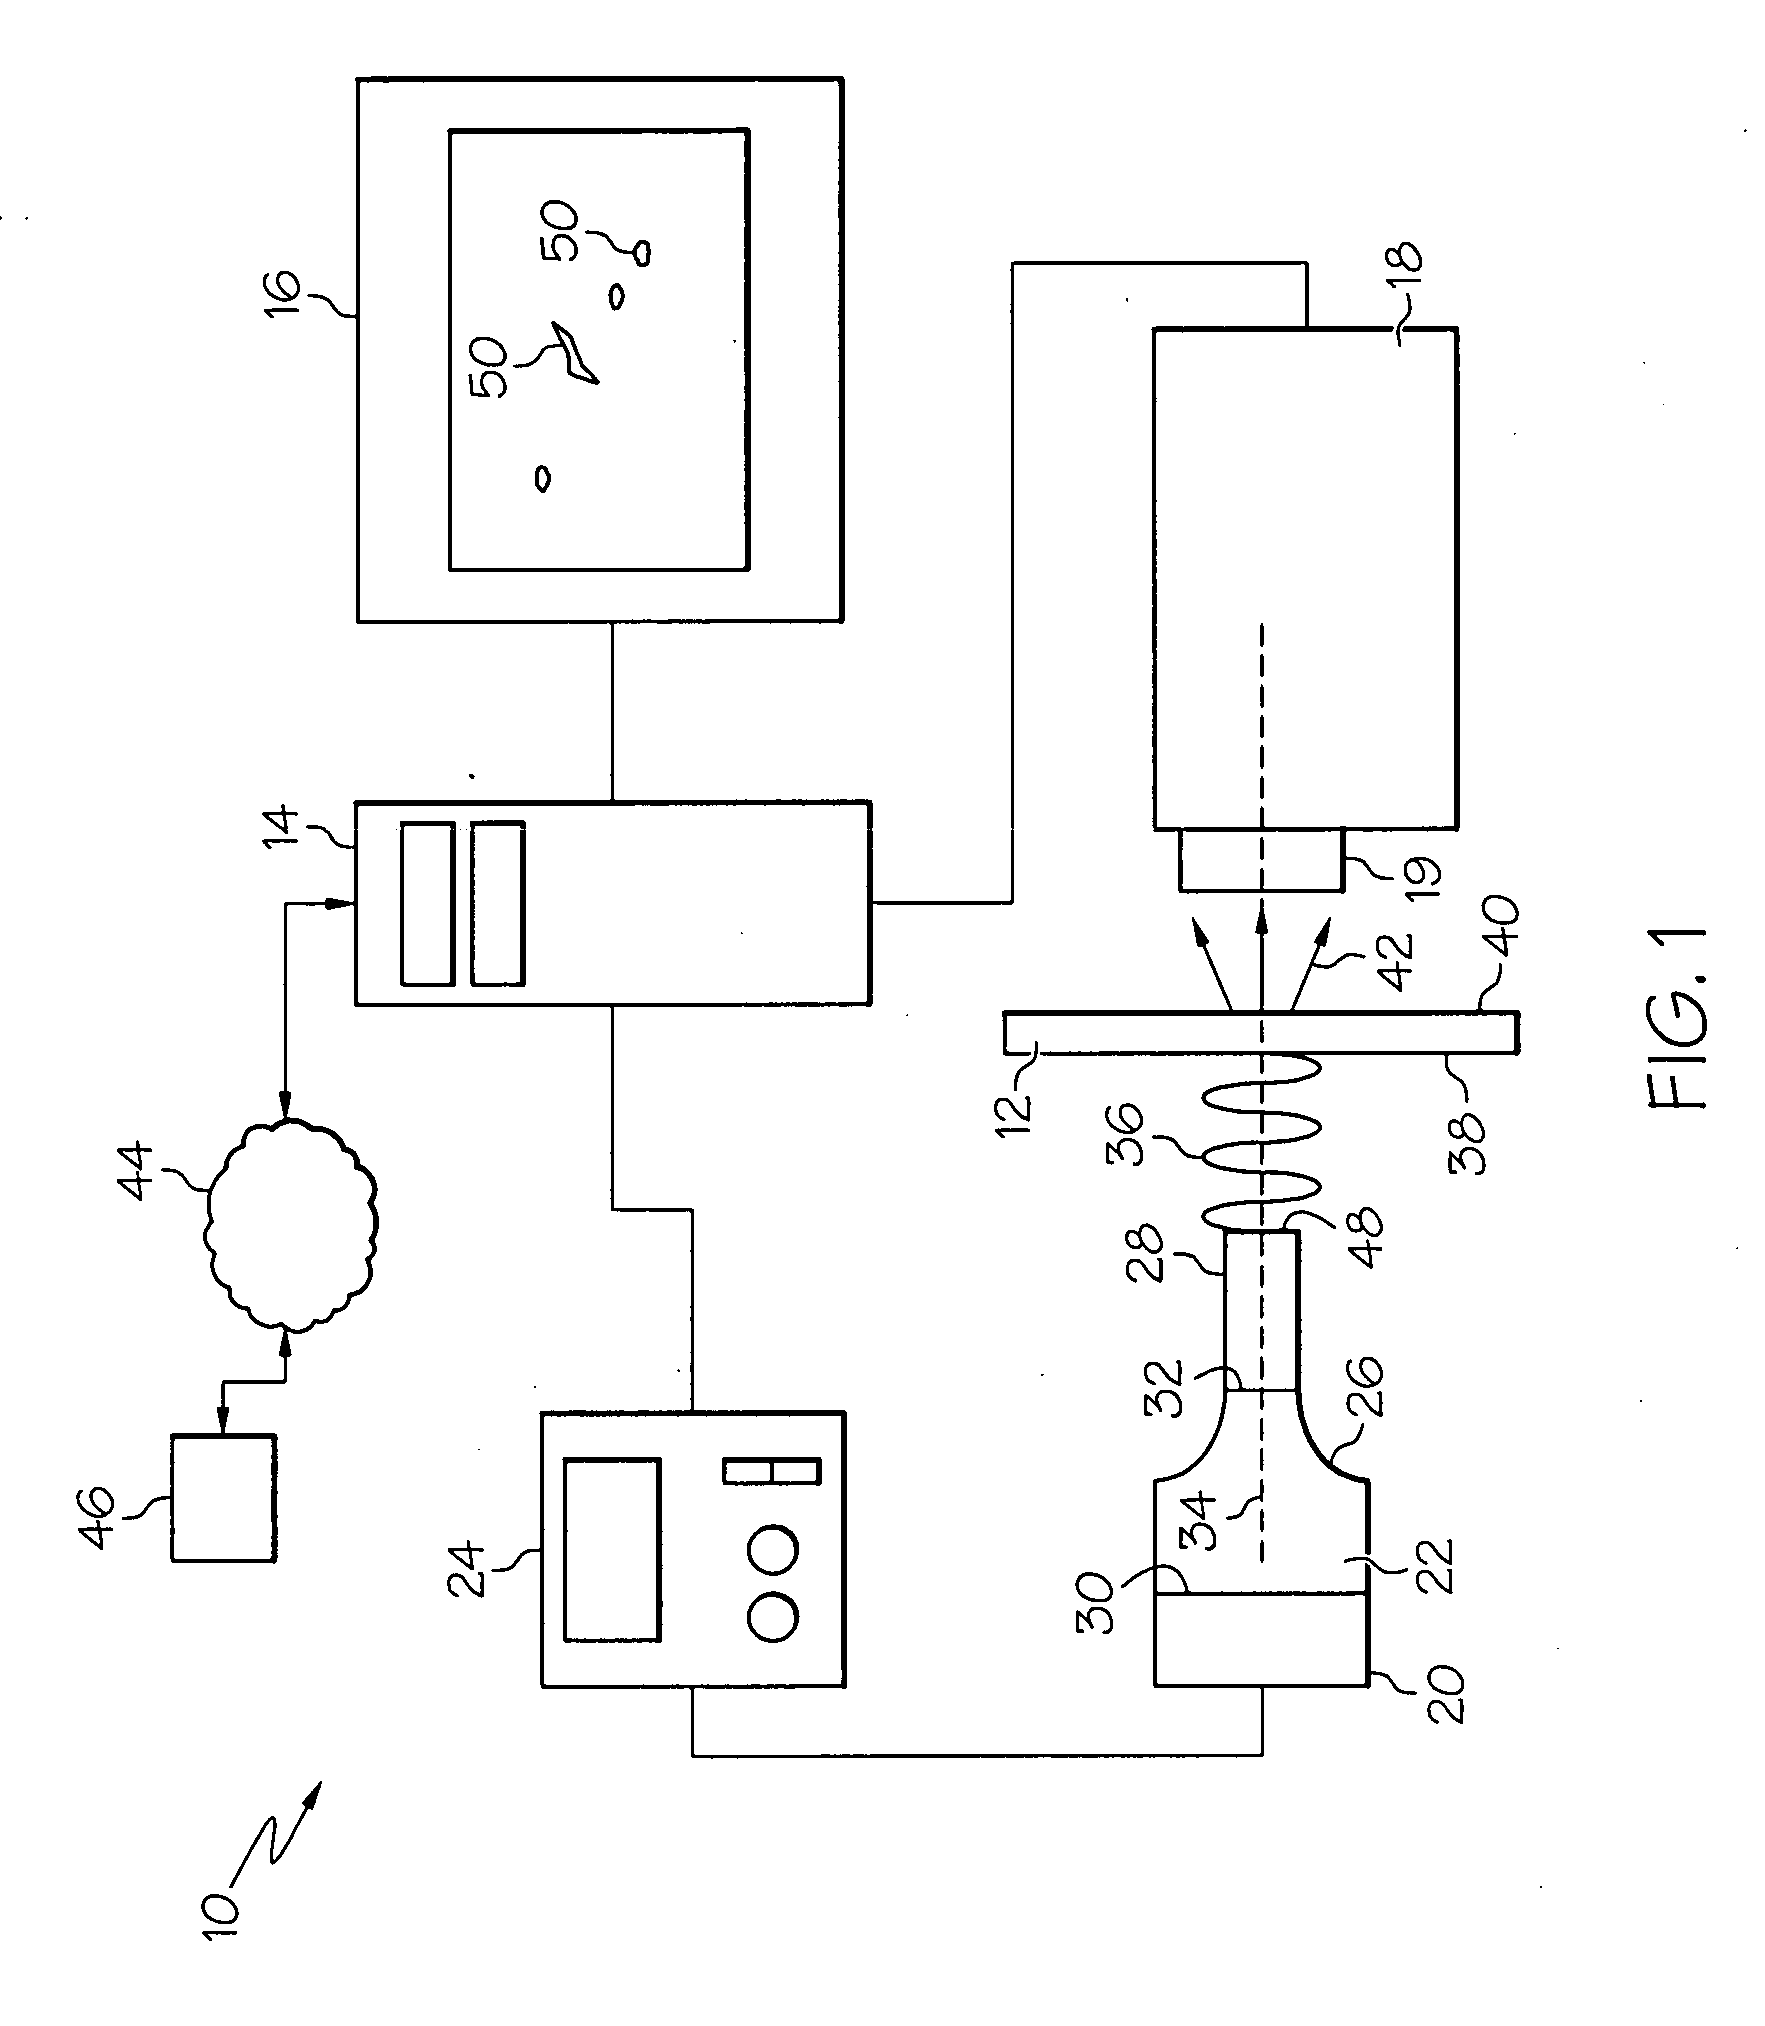 Non-contact acousto-thermal method and apparatus for detecting incipient damage in materials